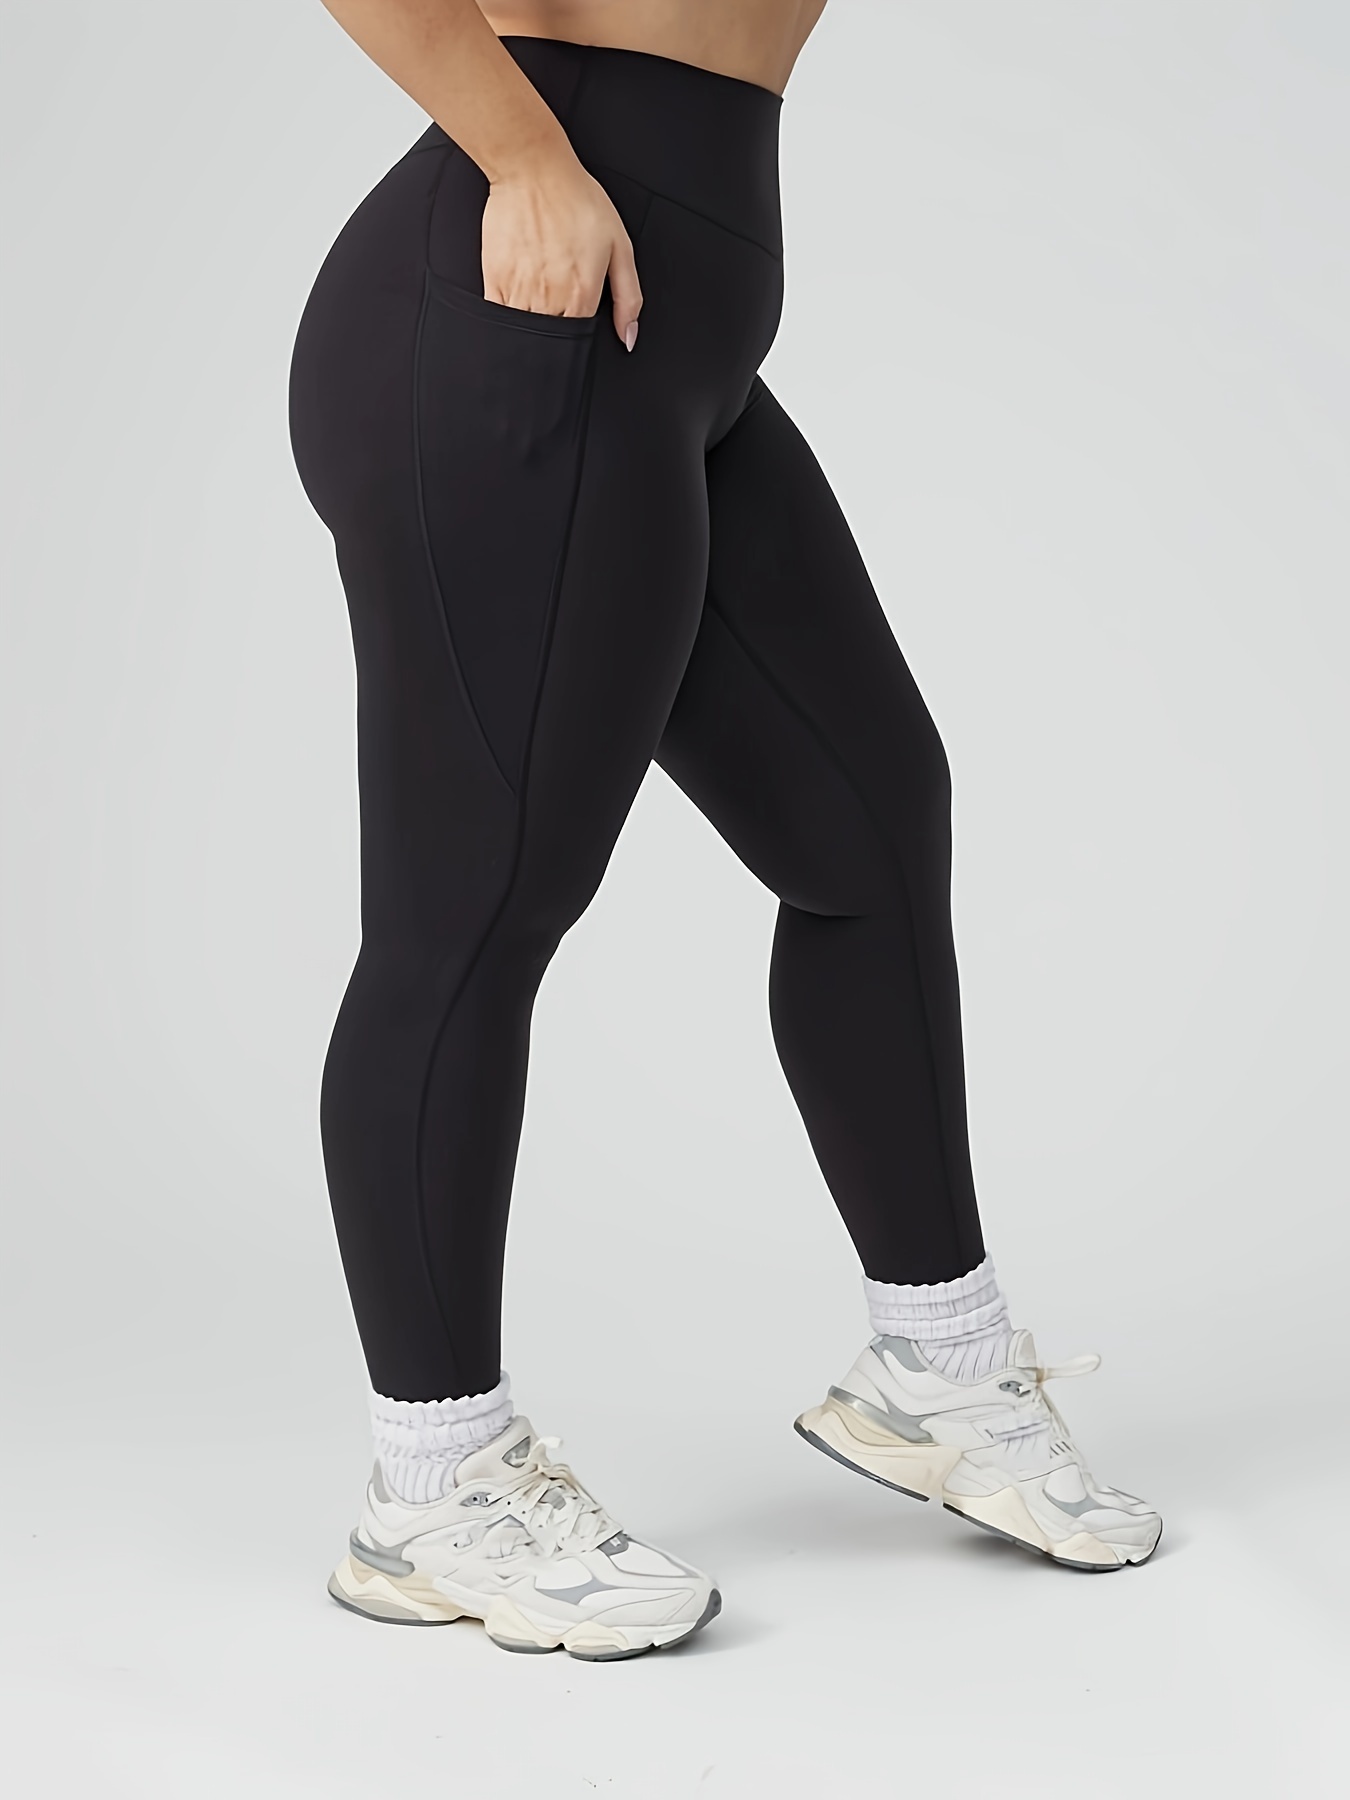 Women's Sports Leggings, Plus Size Solid Color High Waist Stretchy Fitness  Leggings With Side Pockets